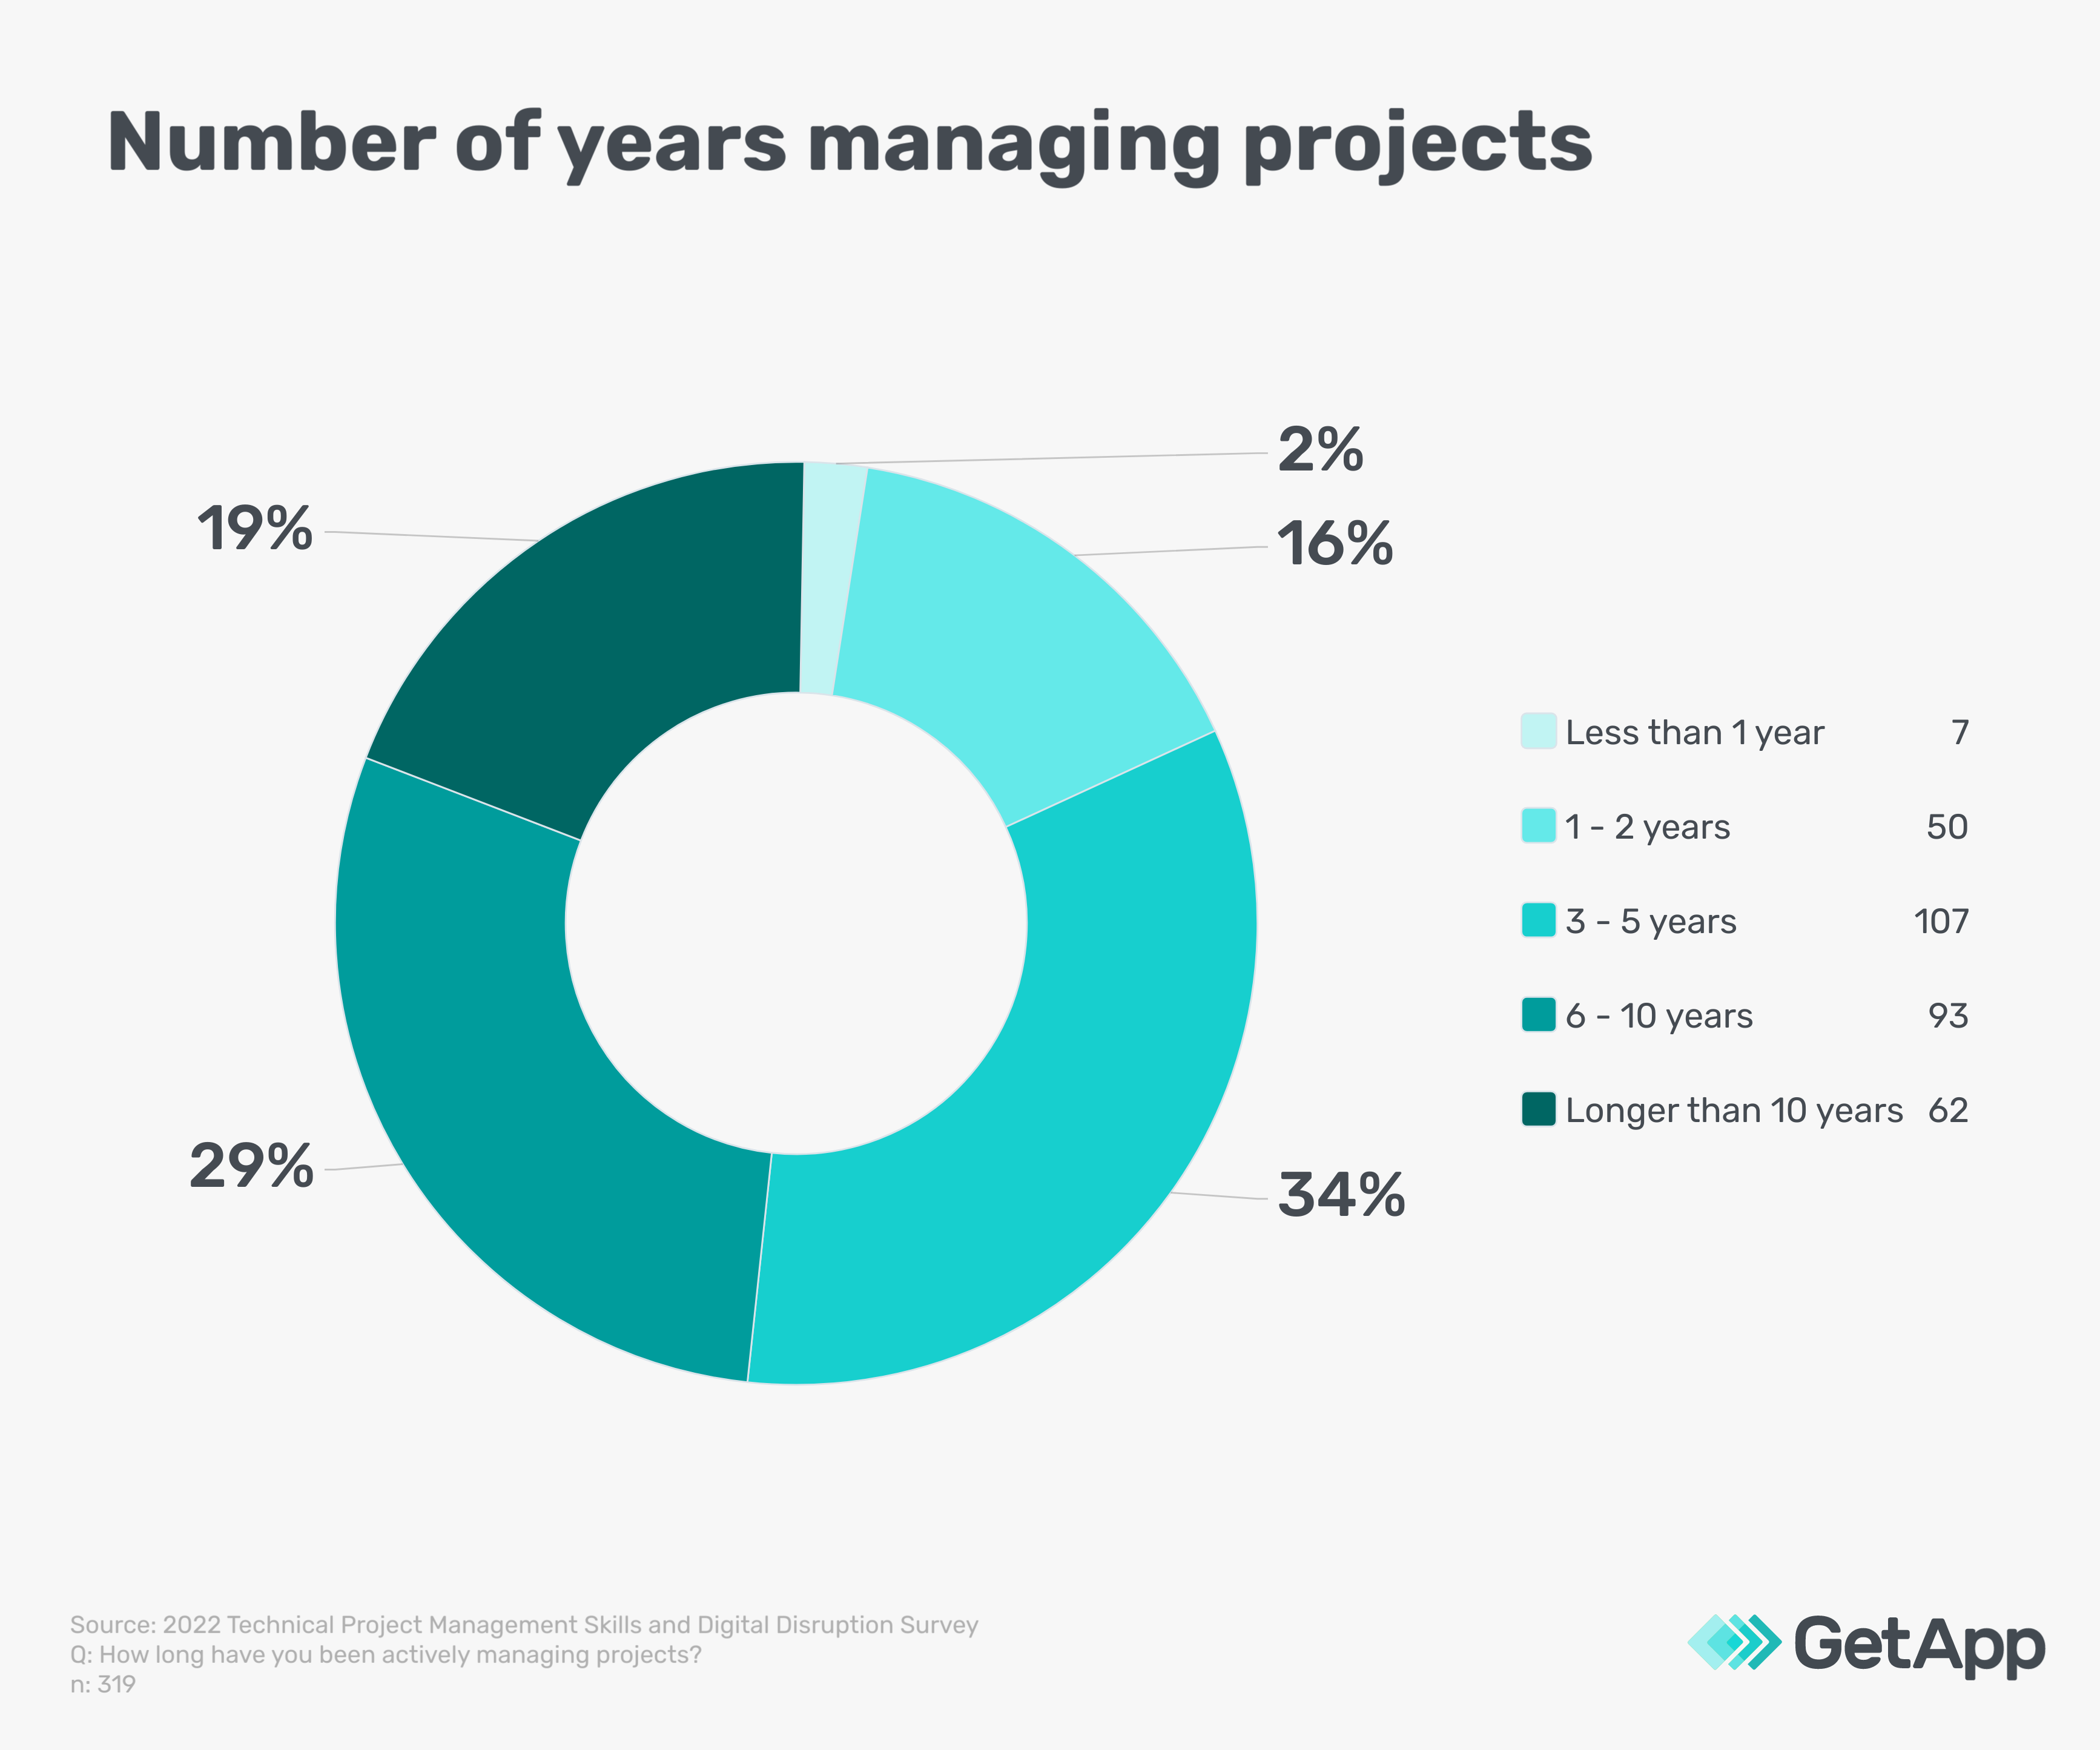 Years managing projects